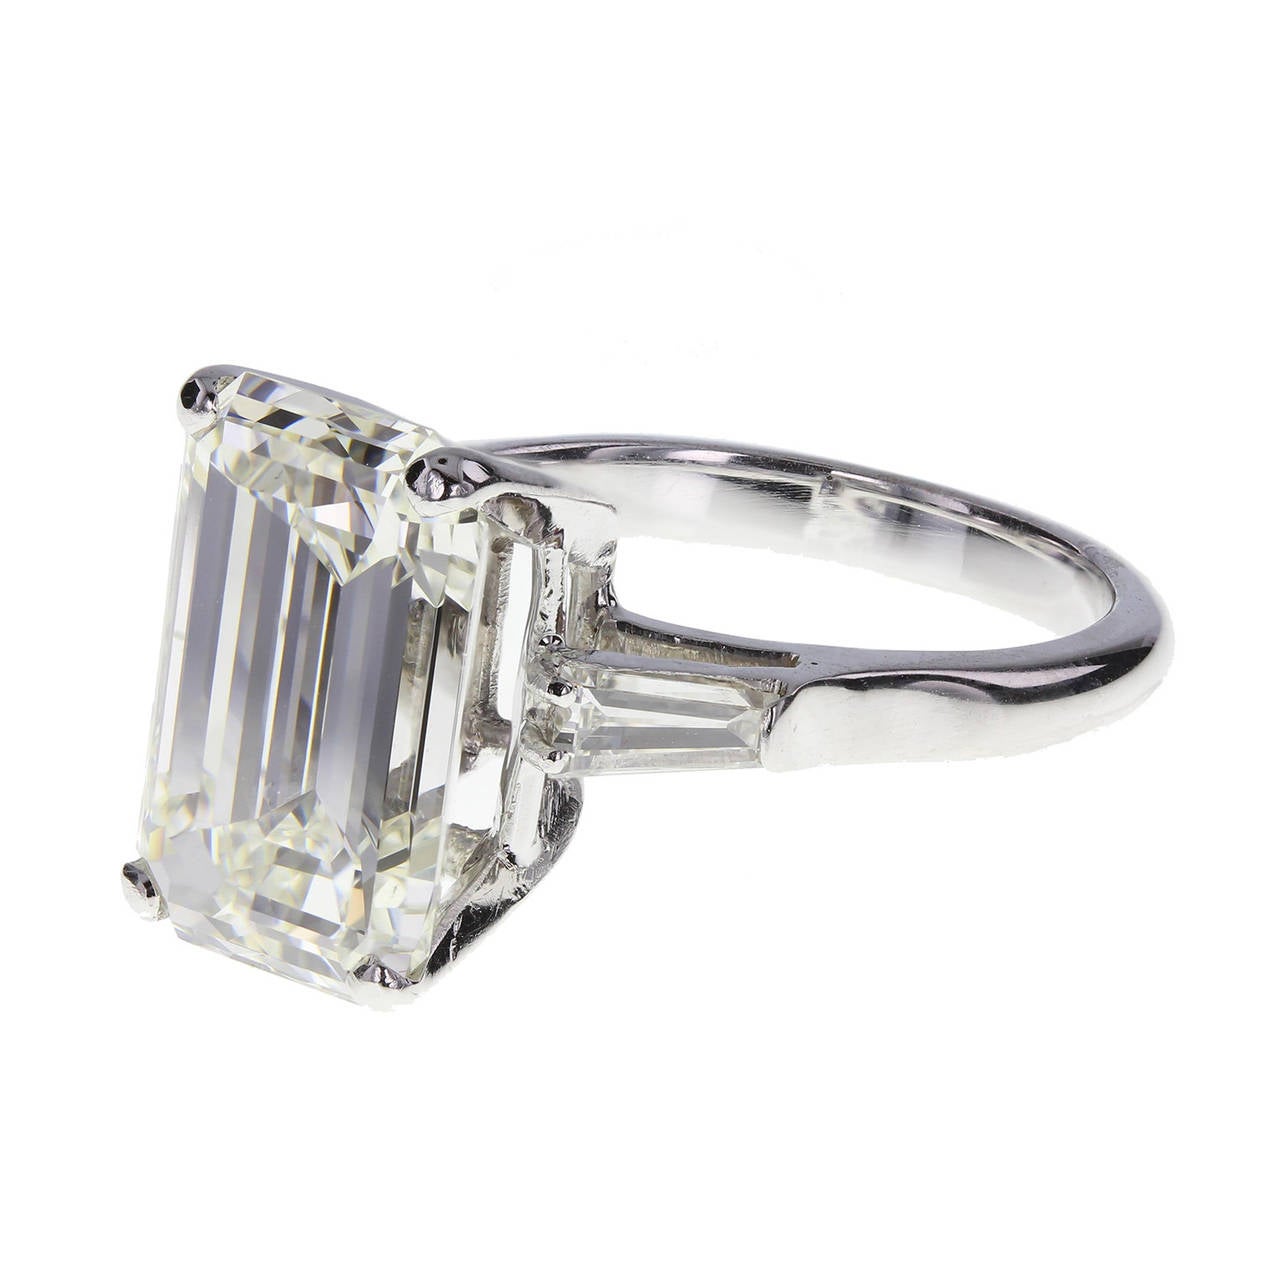 A large and impressive 6.07 carat emerald-cut diamond mounted in four claws. Flanked on each shoulder by a single tapered baguette-cut diamond. Uniform rounded shank. Accompanied by an HRD certifcate stating that the diamond is I colour and VVS2